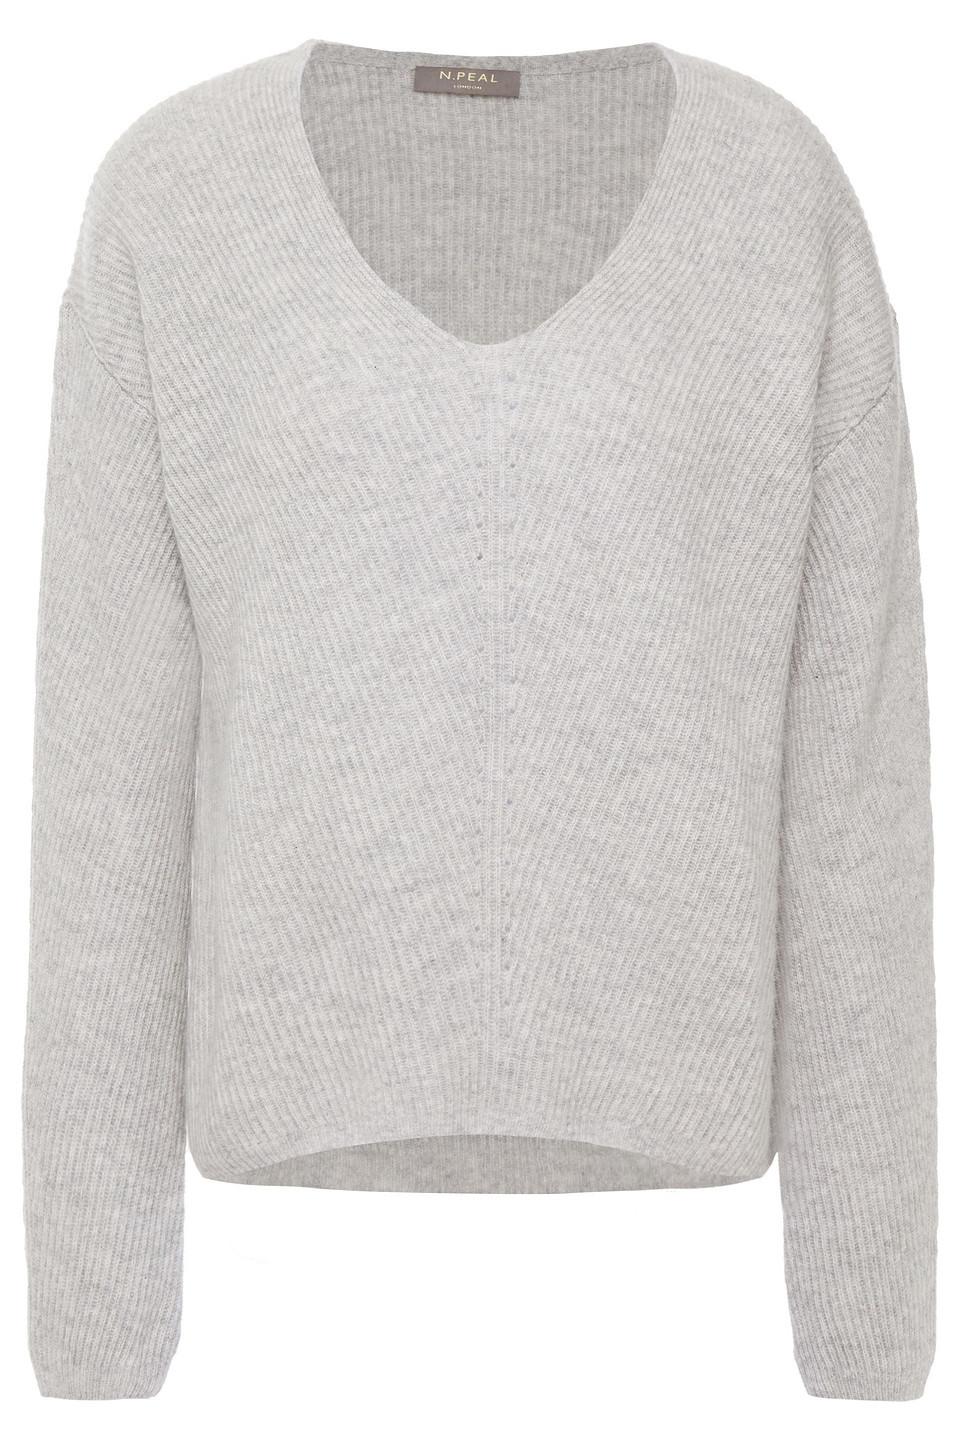 N.Peal Cashmere Ribbed Cashmere Sweater in Stone (Gray) - Lyst